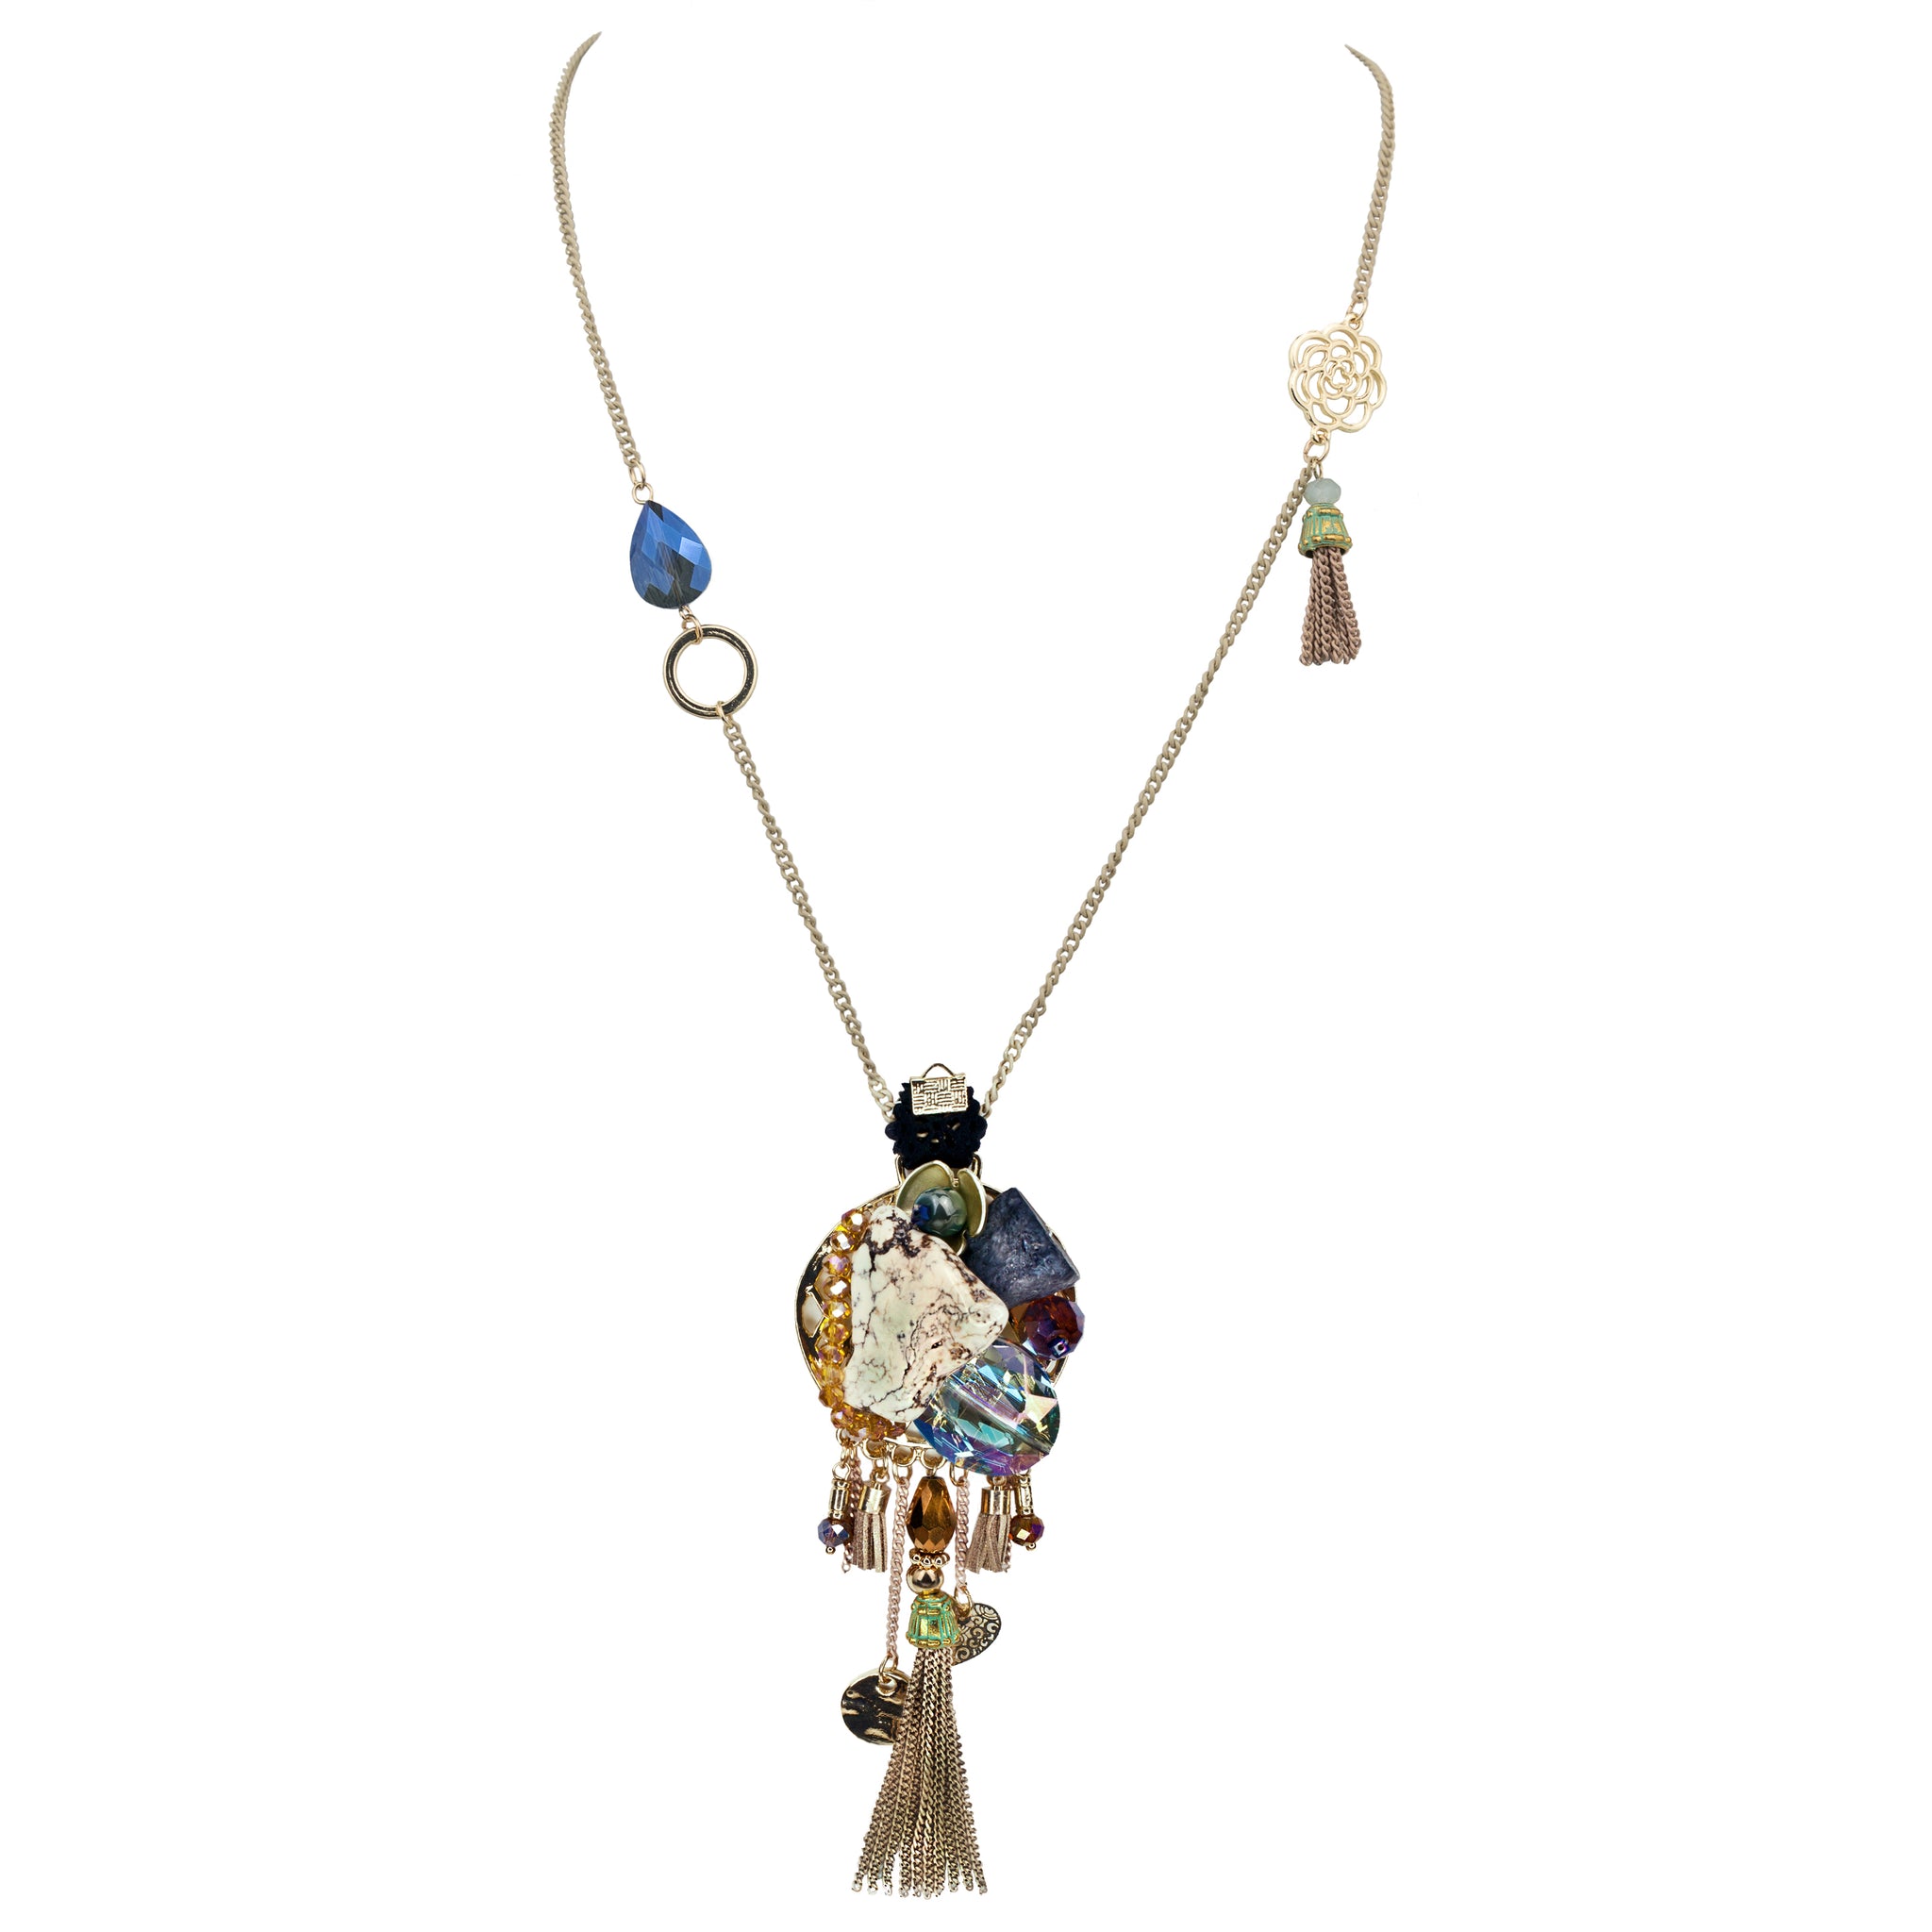 Unique and Versatile Necklace Of River Washed Stones With Faceted Crystals, Santa Fe S043-03